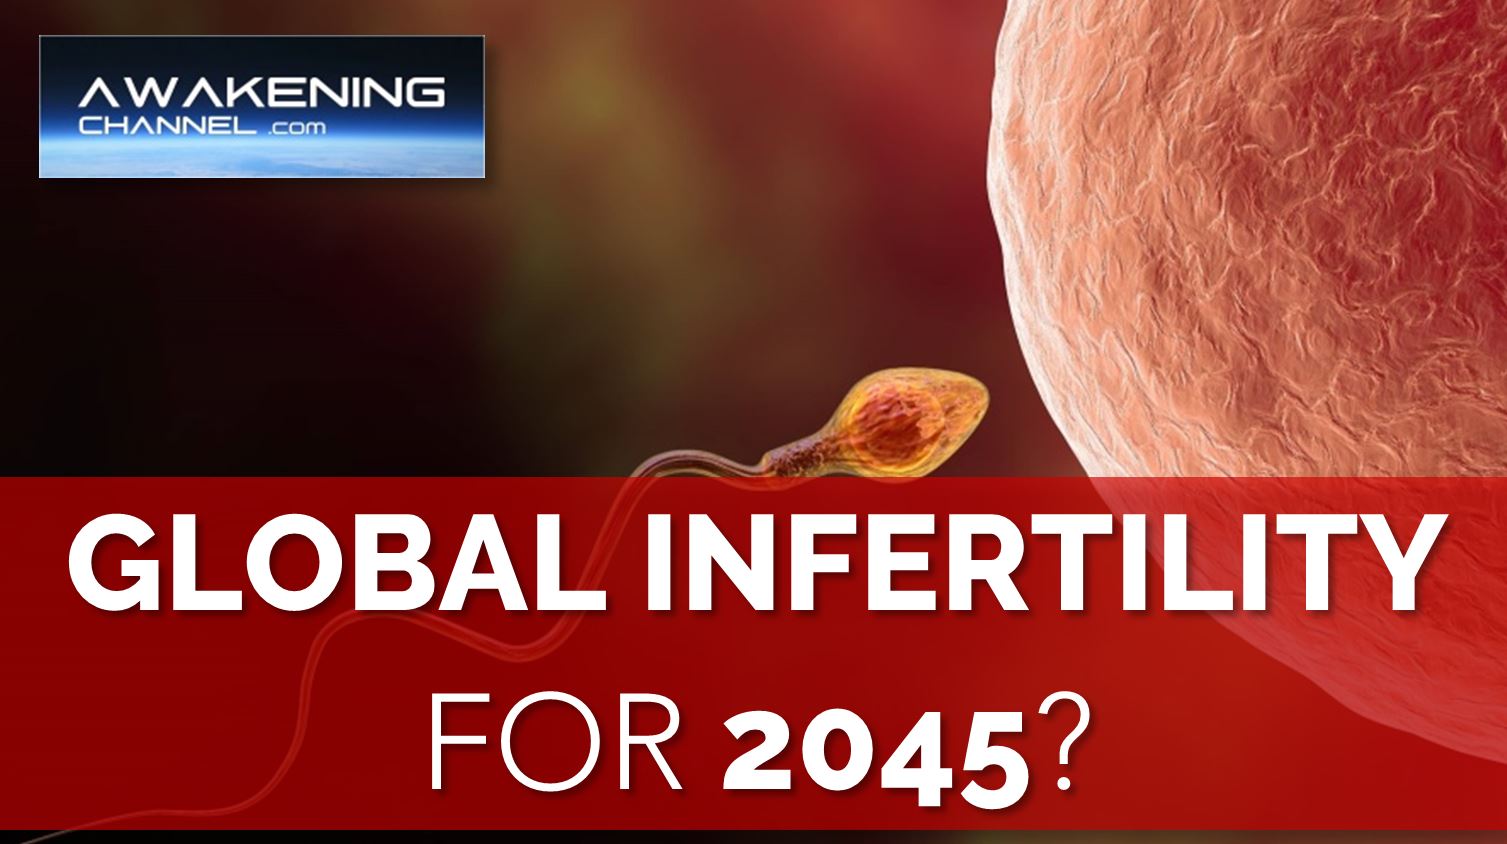 SPERM COUNT Could Reach ZERO by 2045